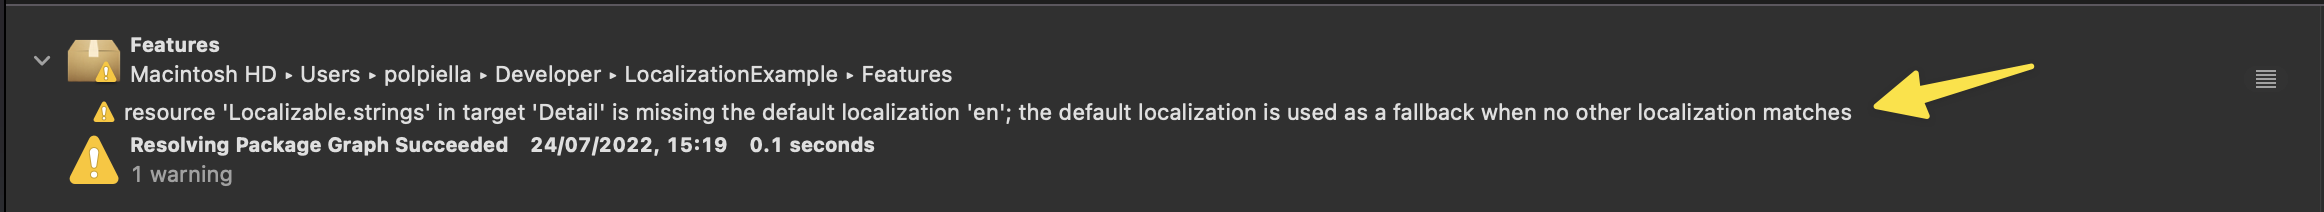 Xcode warning shown when default localisation is missing.